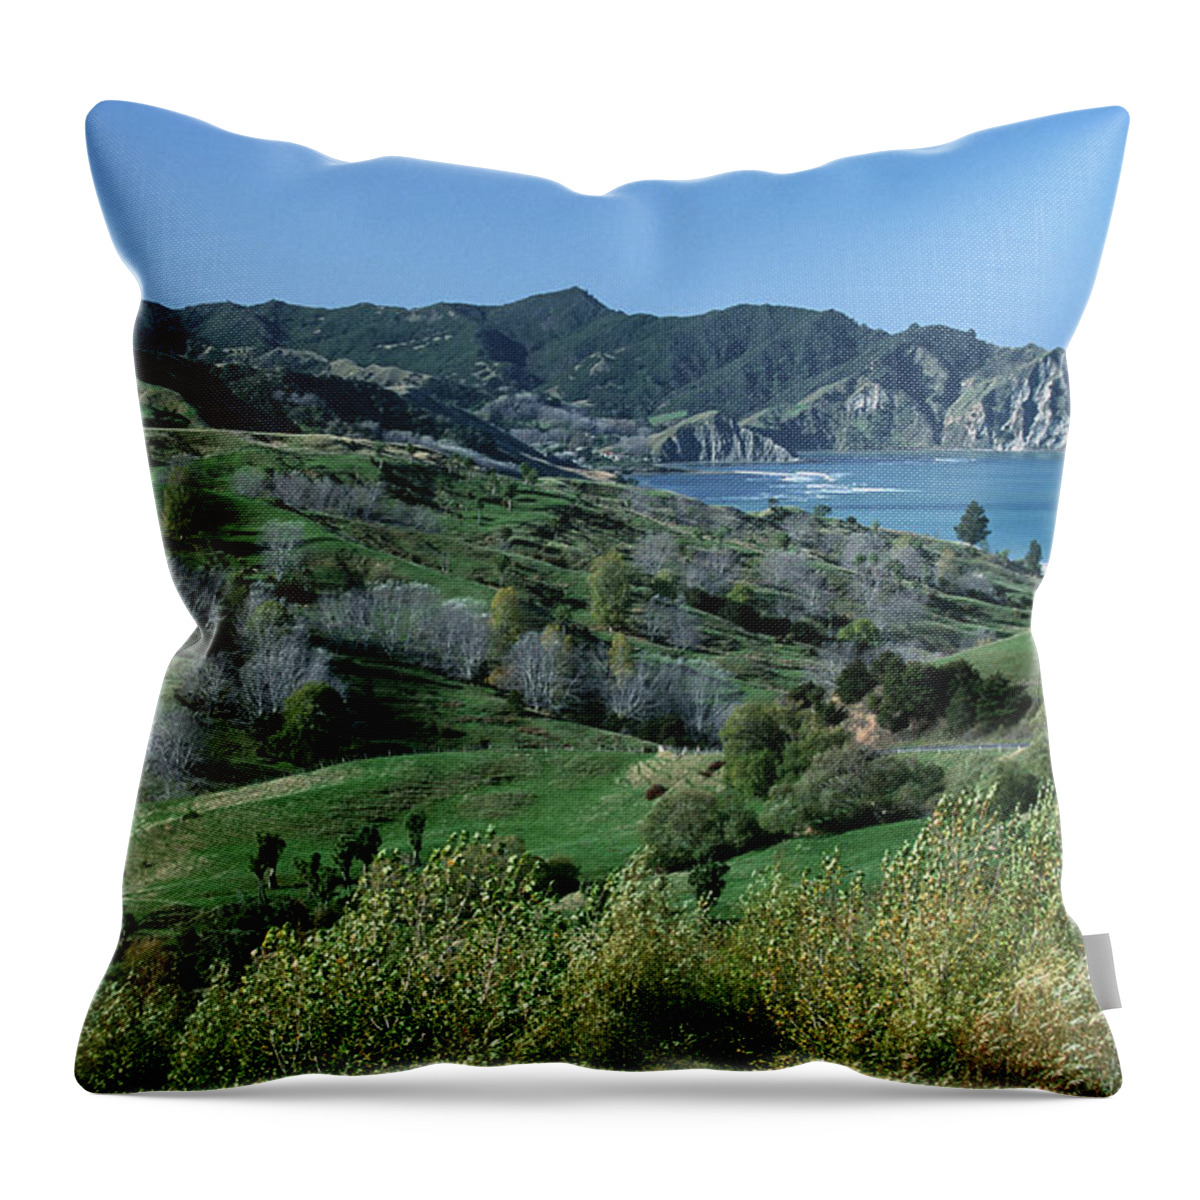 Scenics Throw Pillow featuring the photograph New Zealand, North Island, Hawkes Bay by John Seaton Callahan